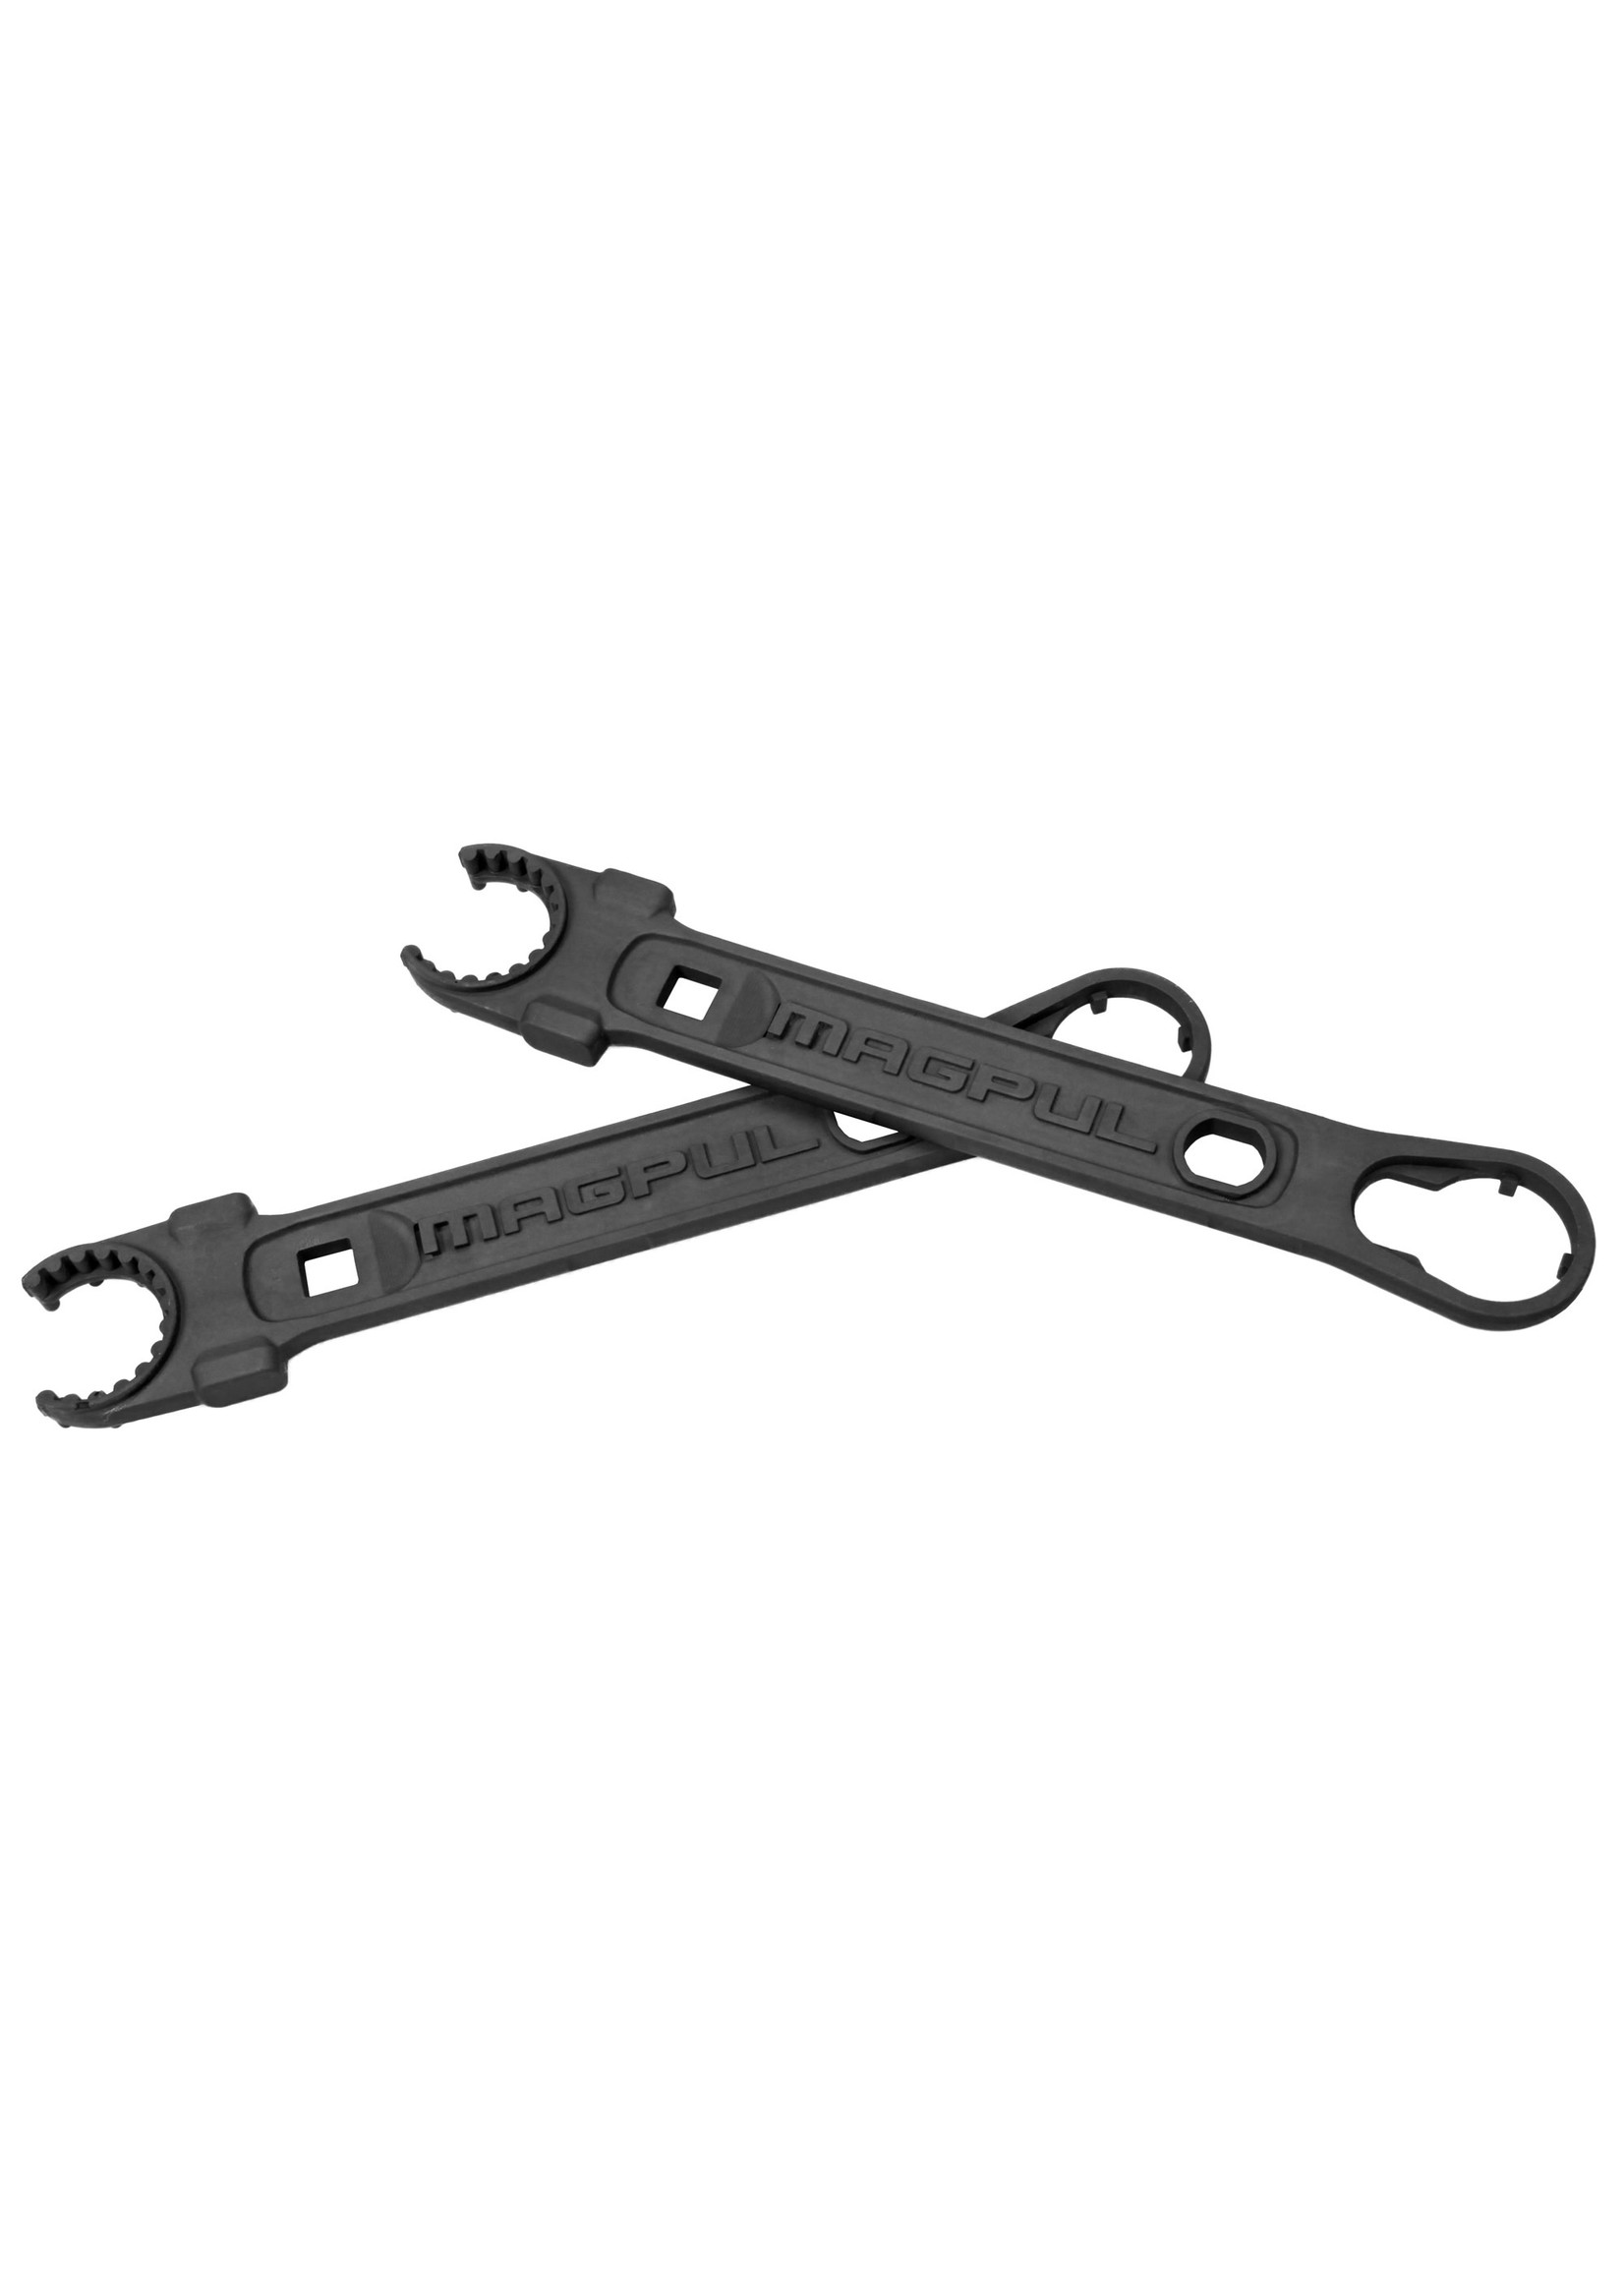 Magpul Magpul Industries, Armorer's Wrench, Fits AR-15 / M4  Rifles, Black Steel, Steel Handle